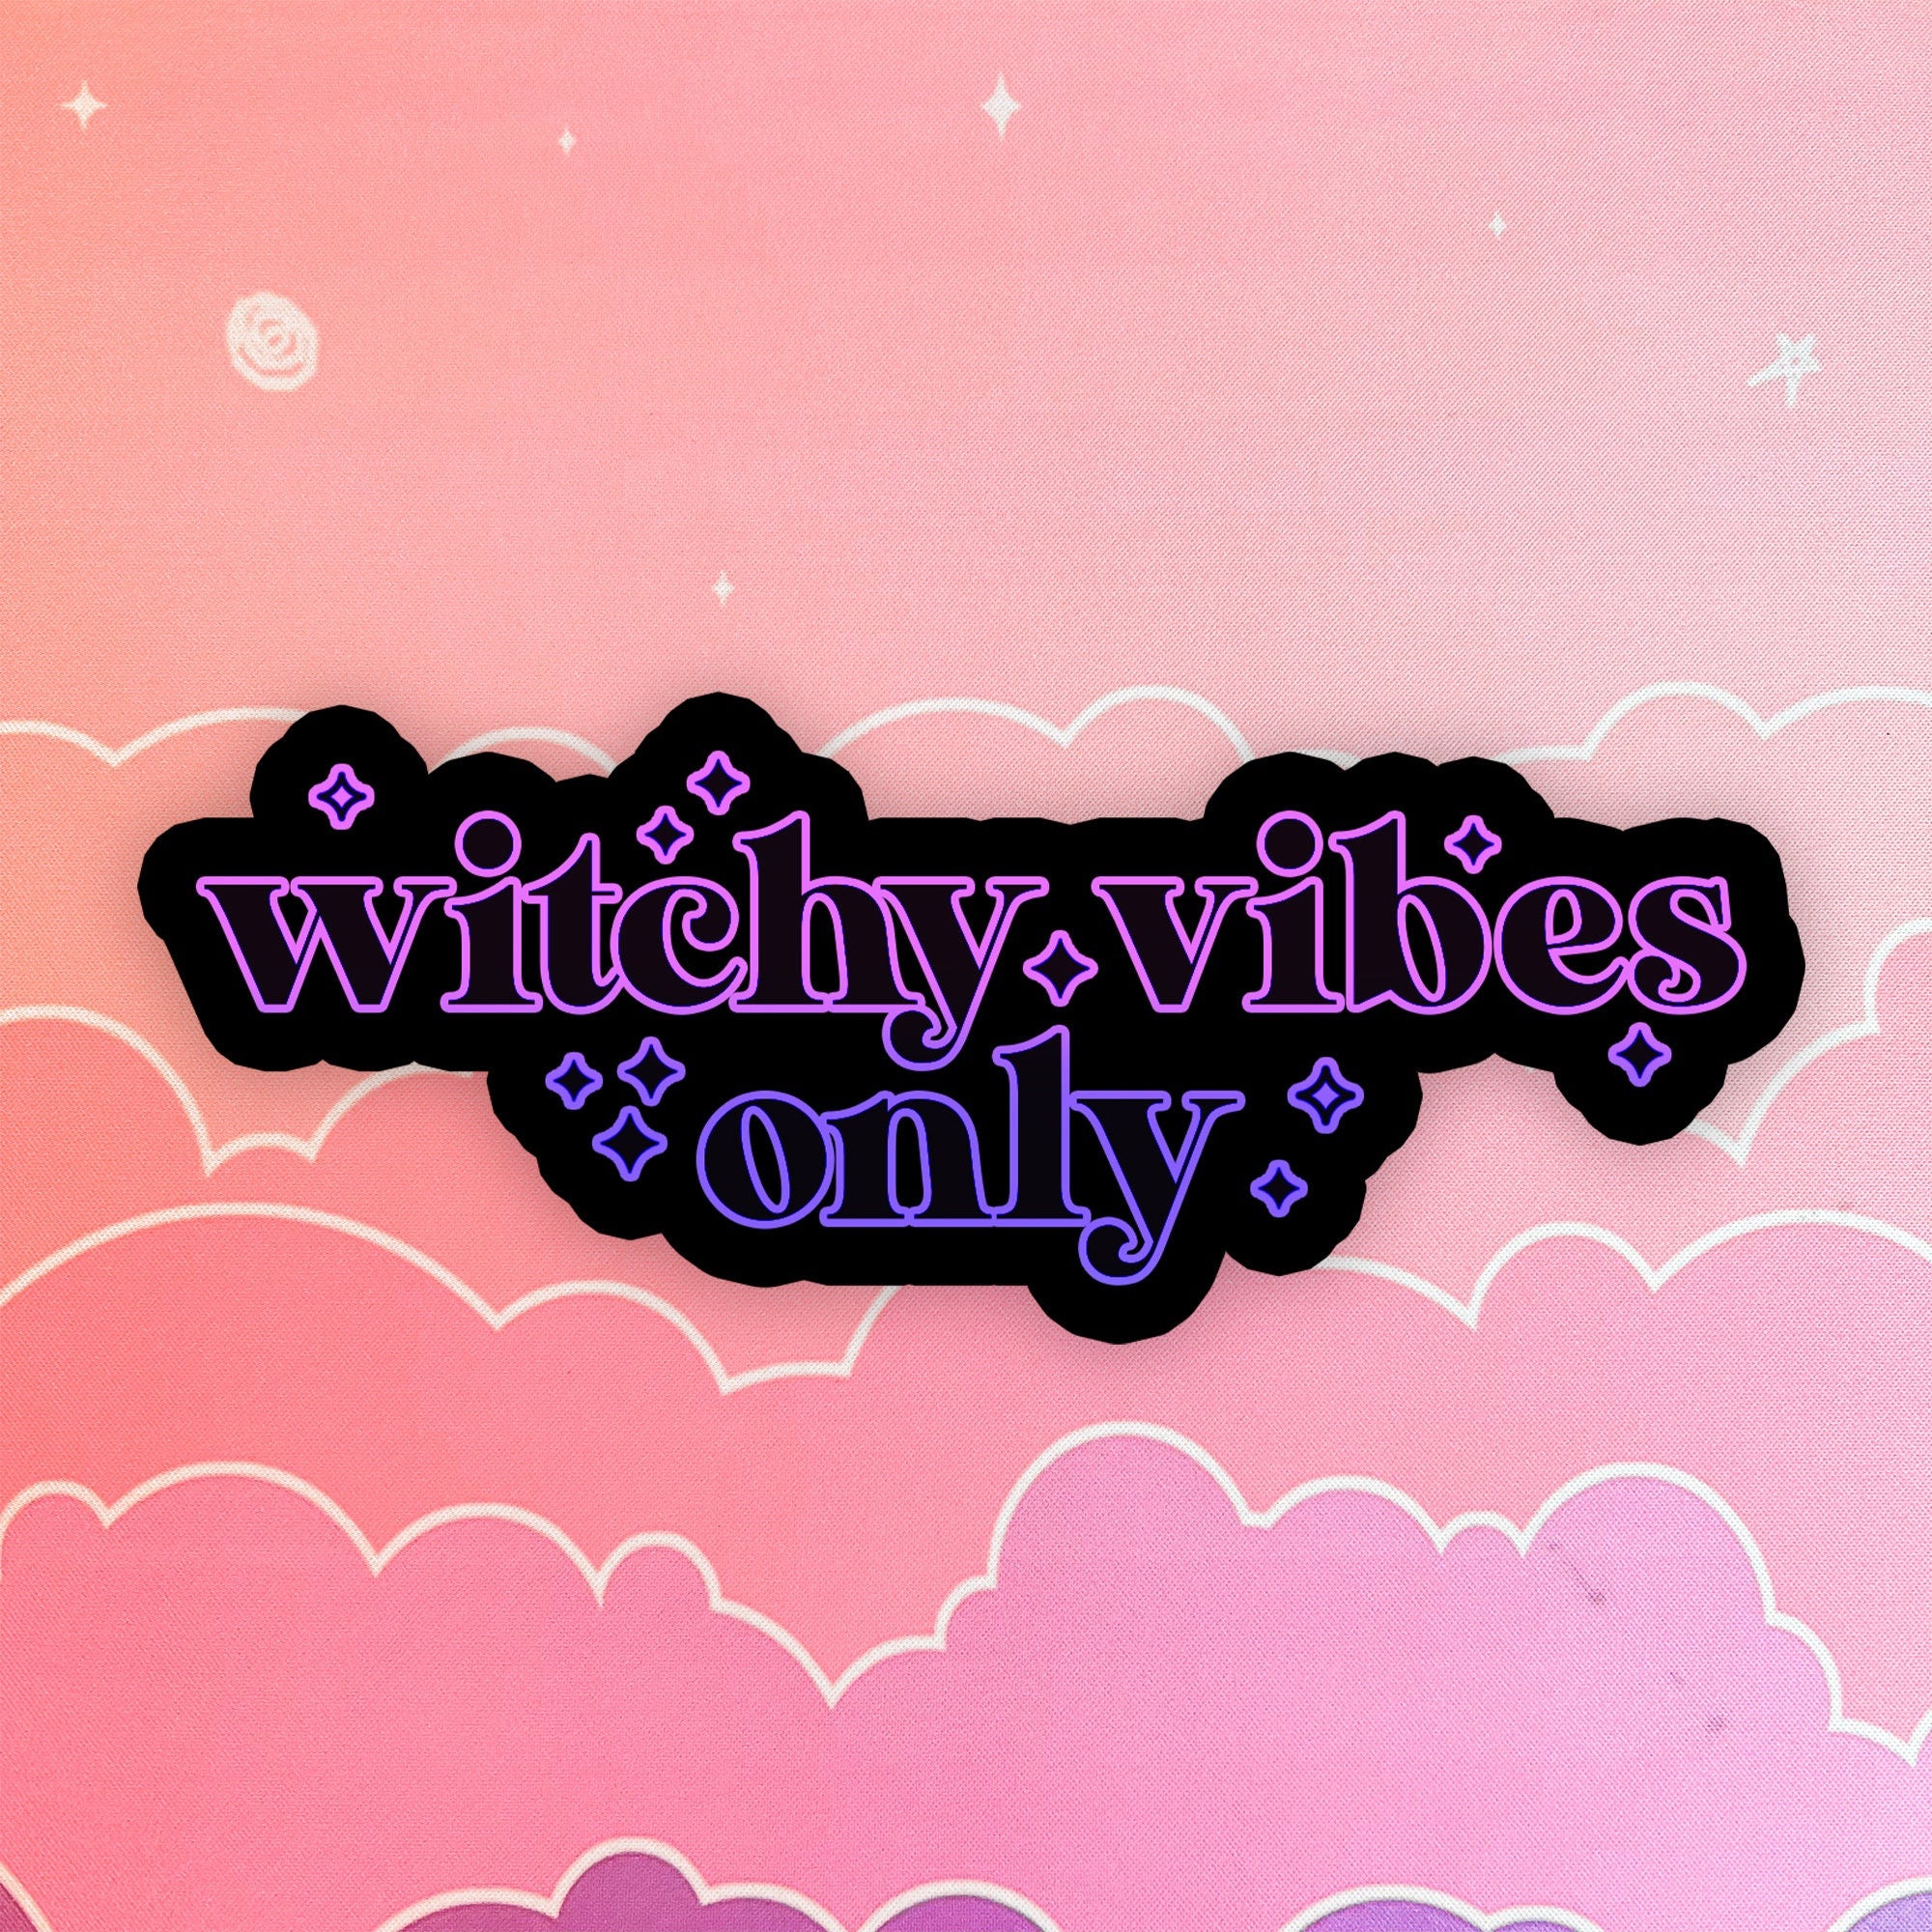 Witchy Vibes Only Sticker Halloween Aesthetic Laptop Stickers, Stationary Spooky Girly Cute Goth Kindle Stickers Hydroflask, Kawaii